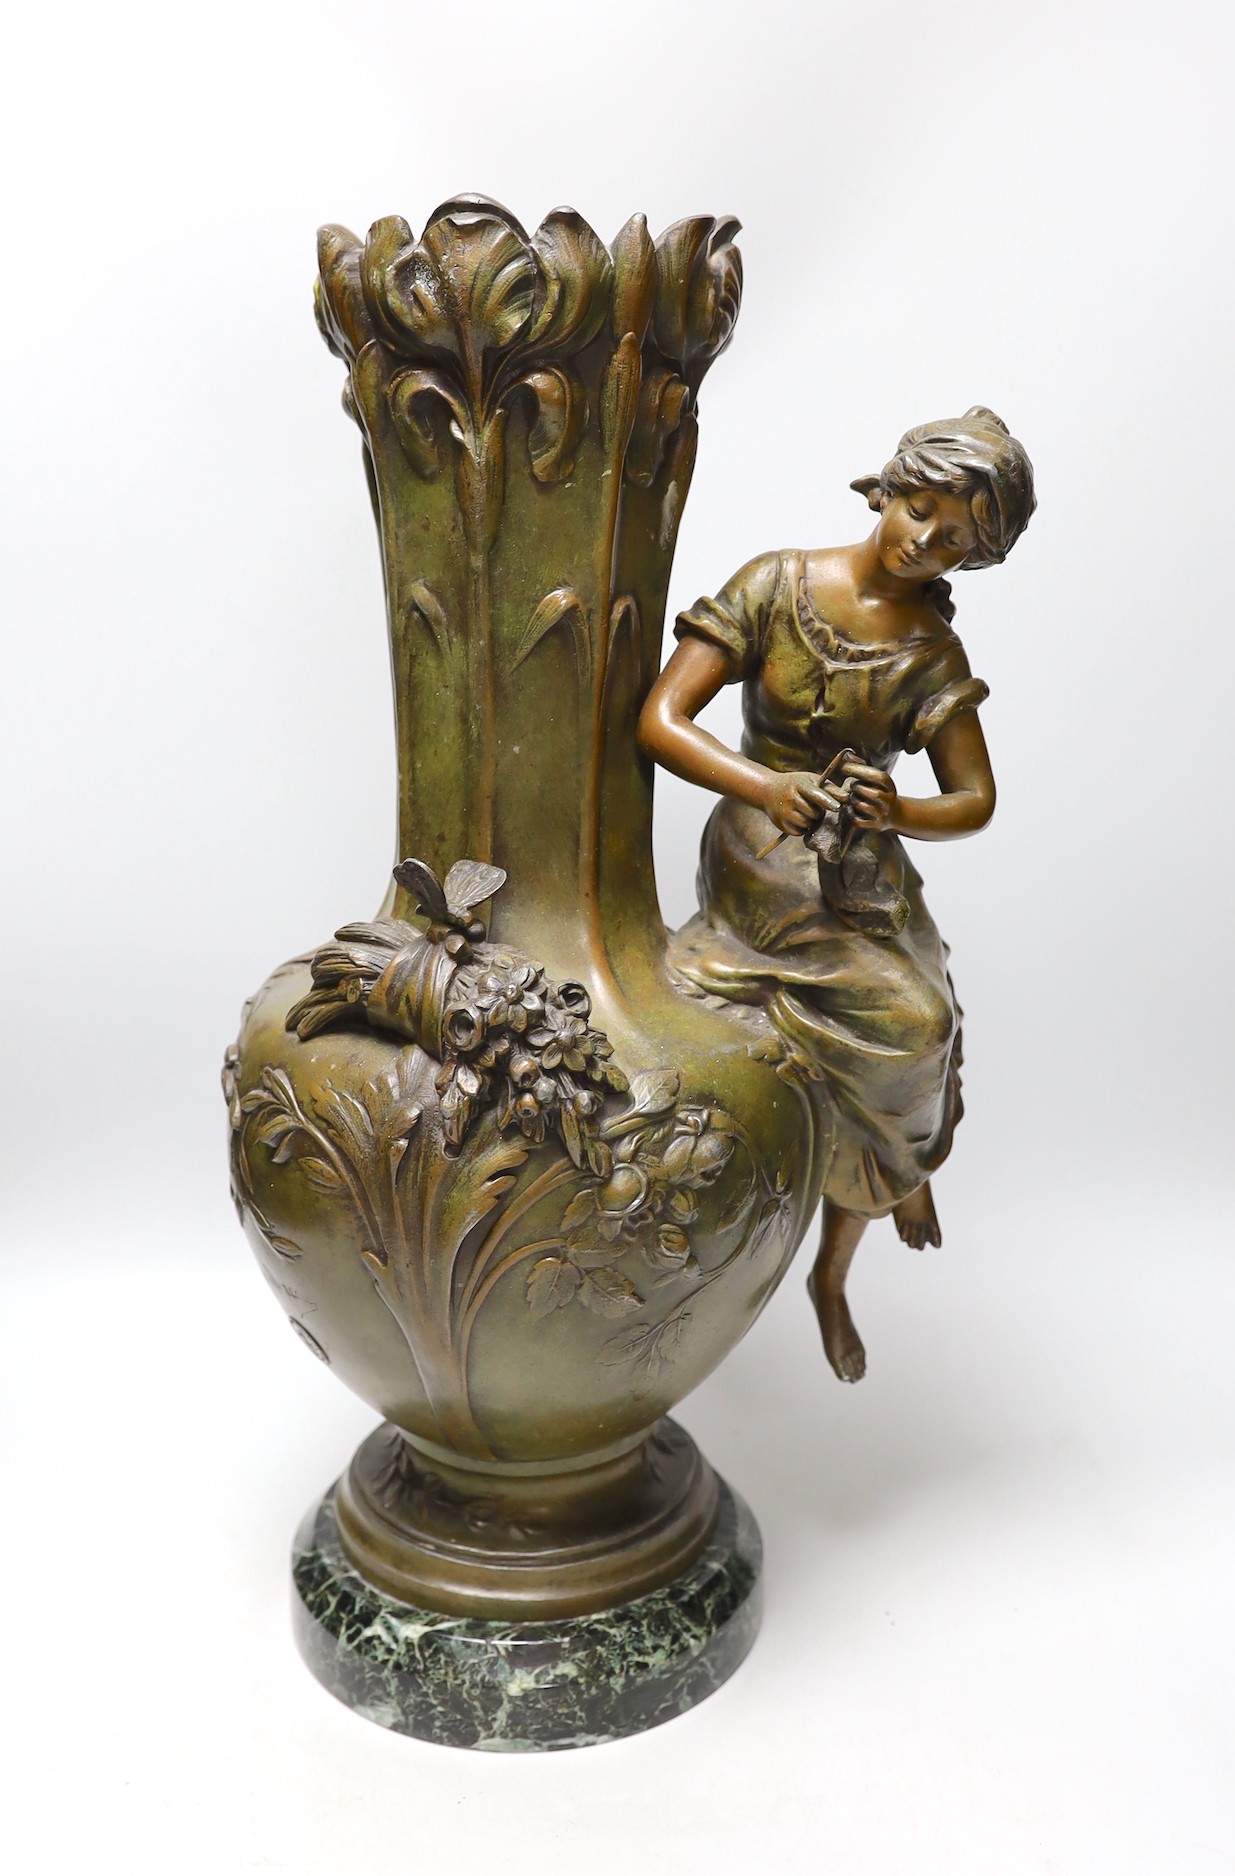 A French Art Nouveau patinated spelter figural vase, on marble stand, stamped Aug. Moreau with foundry stamp, 50cms